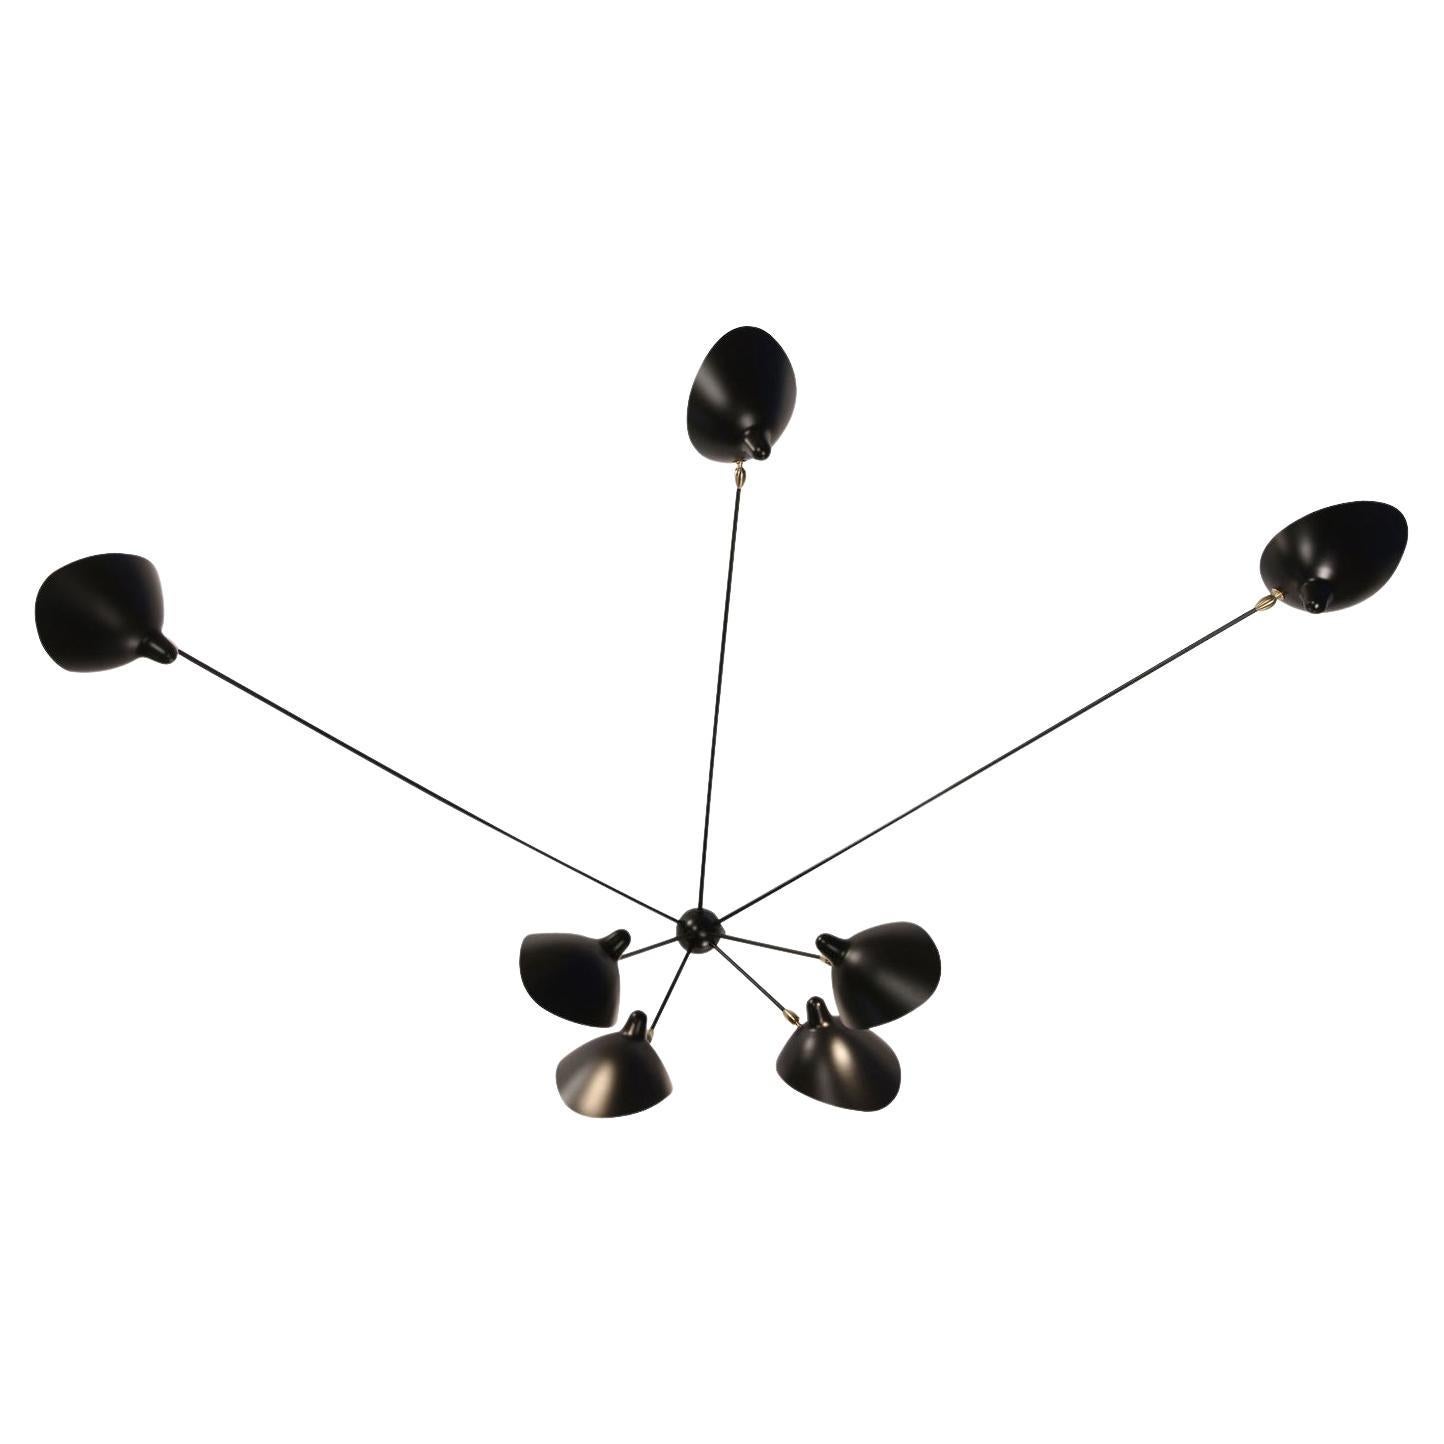 Serge Mouille - Spider Sconce with 7 Arms in Black or White